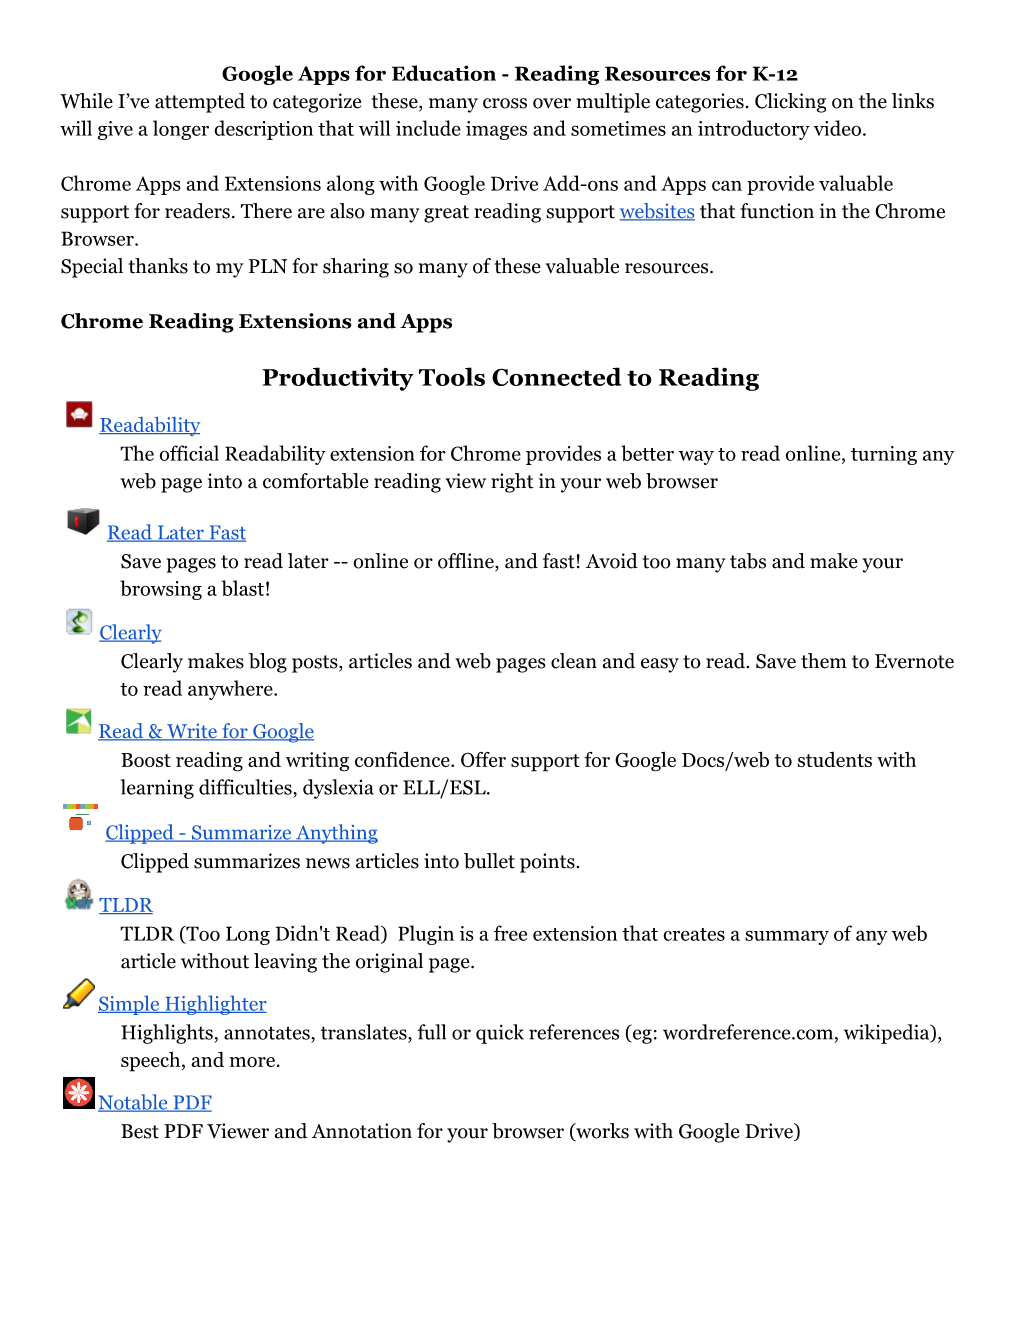 Google Tools for Reading